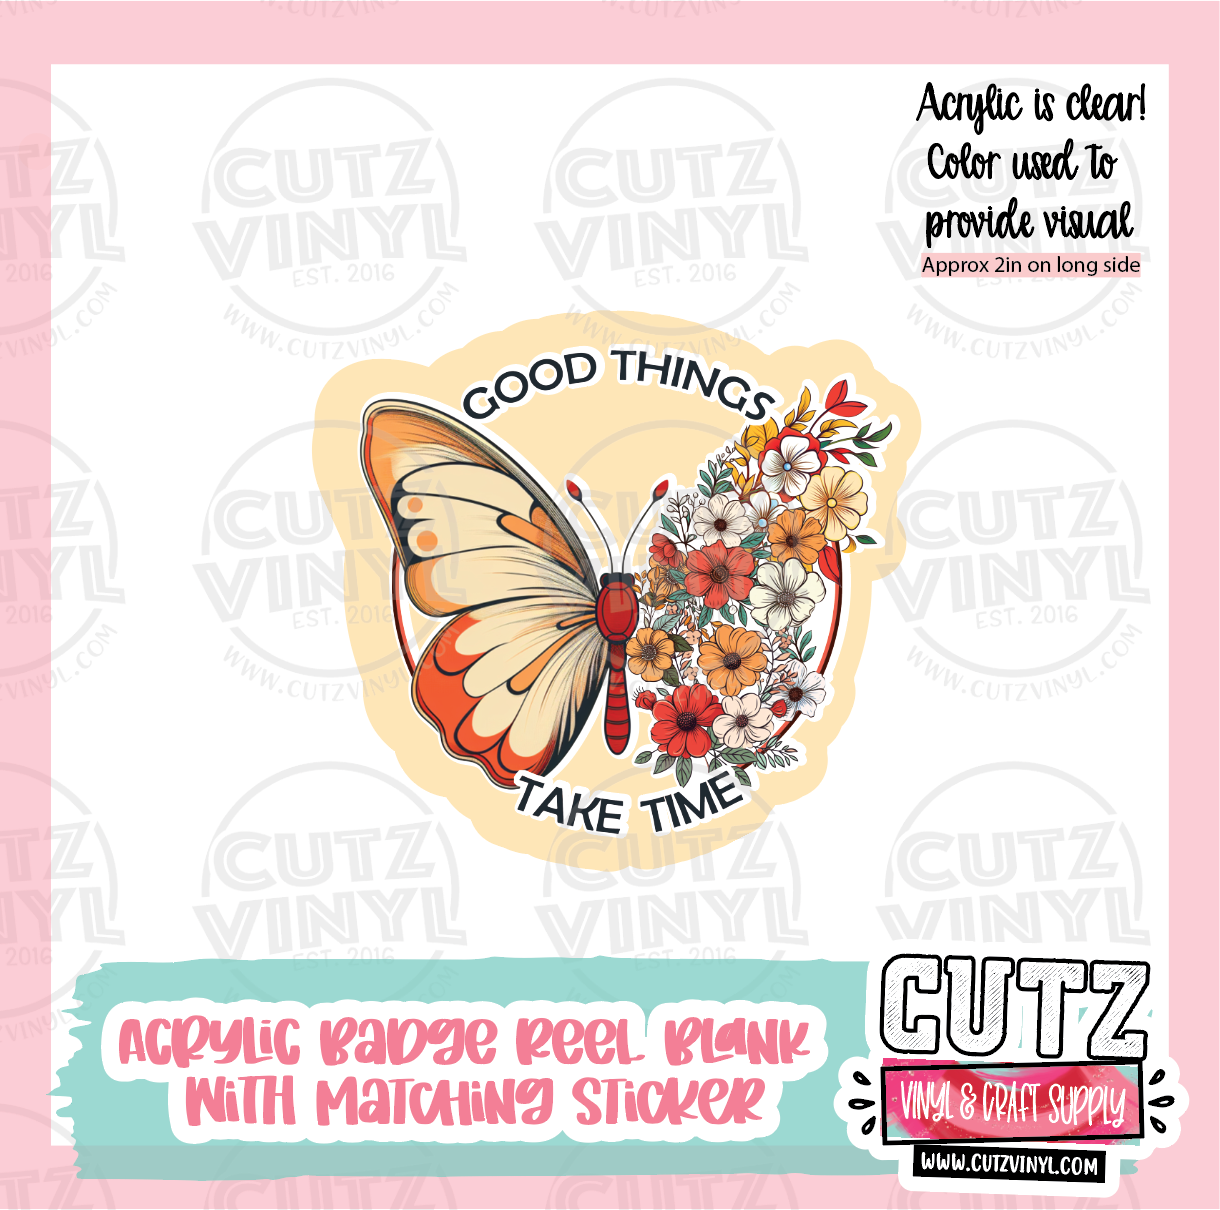 Good Things Take Time - Acrylic Badge Reel Blank and Matching Sticker –  Cutz Vinyl and Craft Supplies